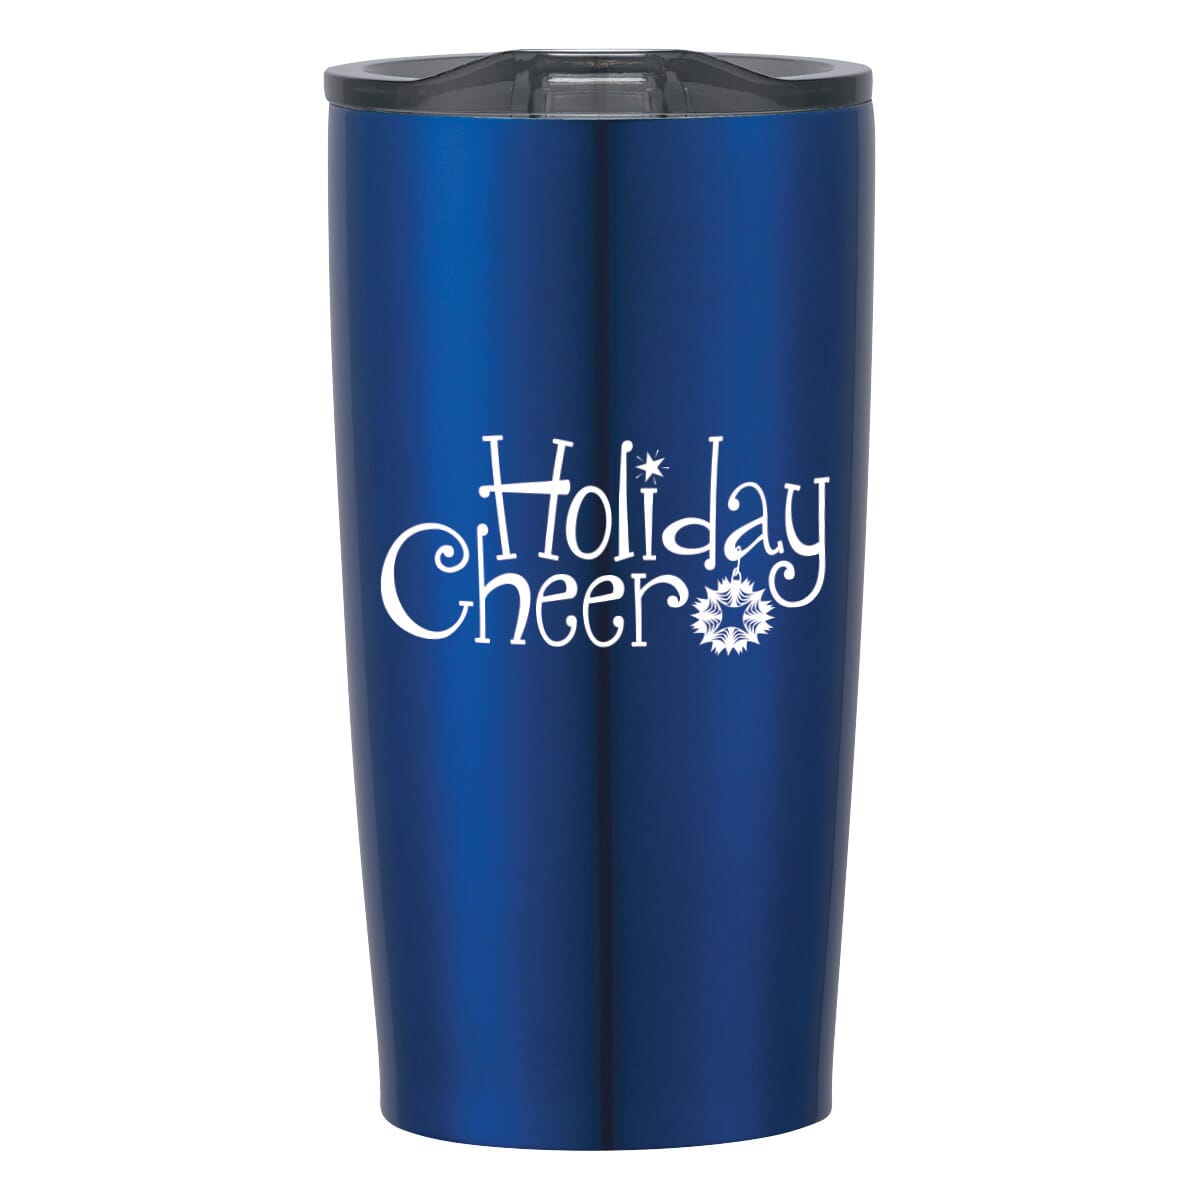 Insulated tumbler with holiday greeting